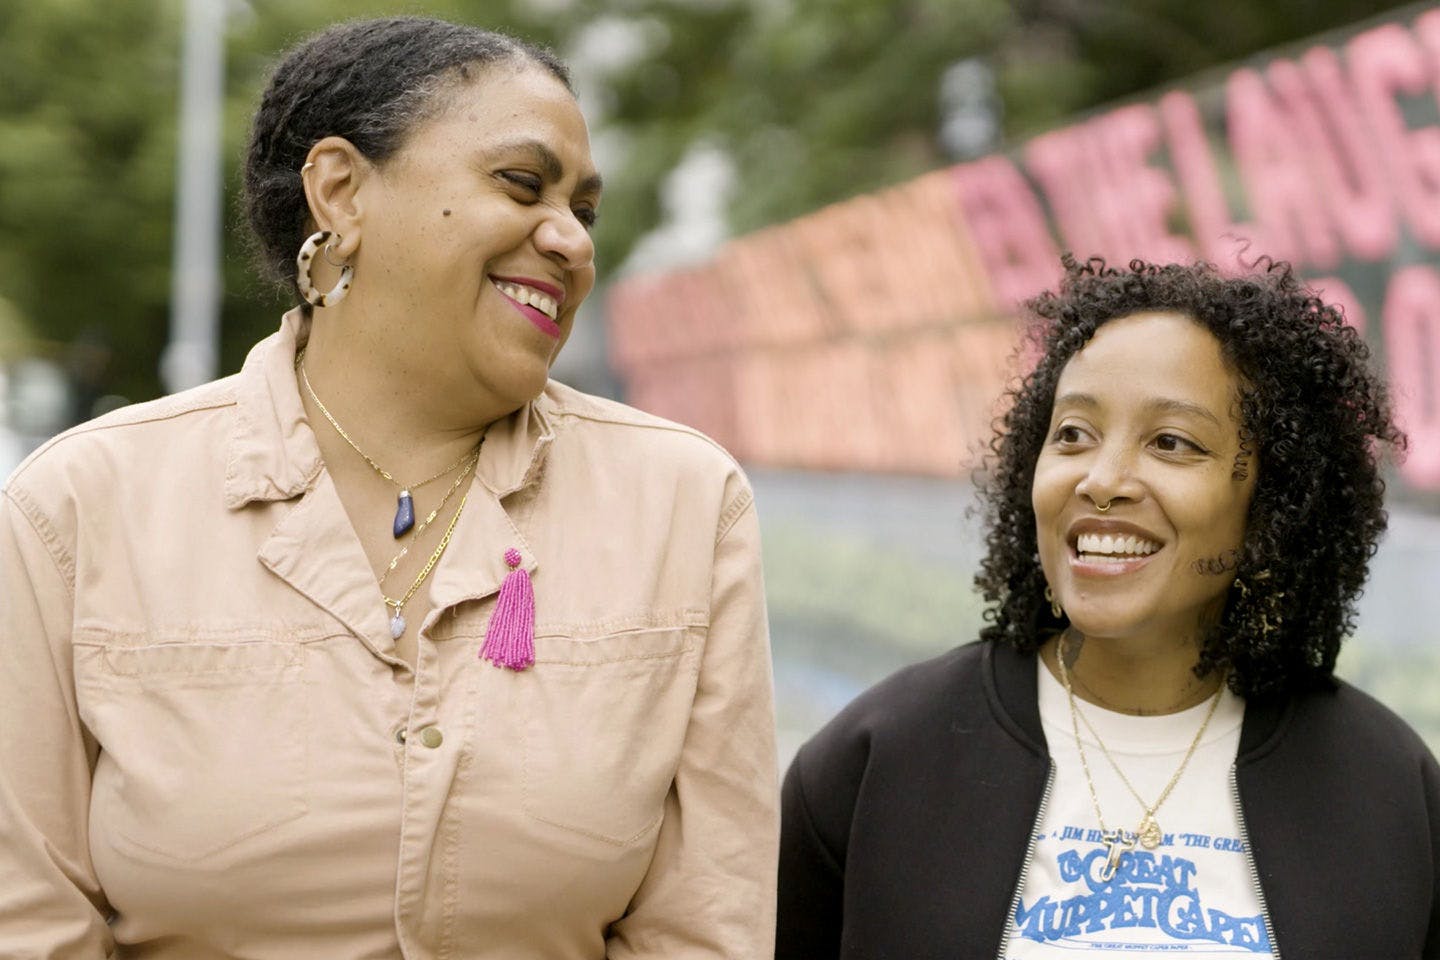 Mildred Beltré and Oasa DuVerney smile during their interview about Brooklyn Hi-Art! Machine's family portraits project.